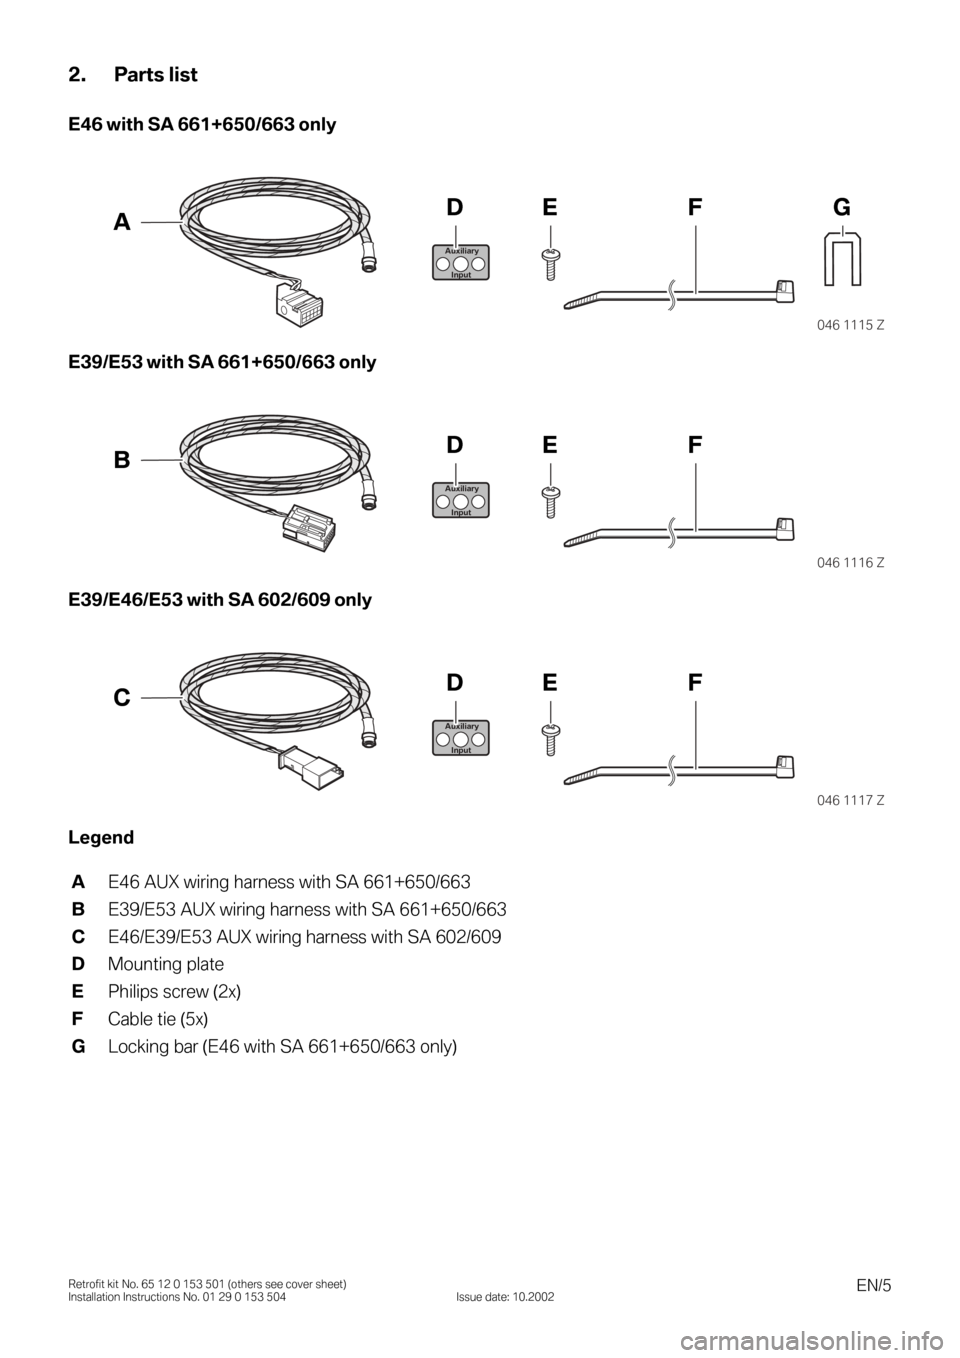 BMW 3 SERIES 2005 E46 Auxilliary Connector Installation Instruction Manual EN/5Retrofit kit No. 65 12 0 153 501 (others see cover sheet)
Installation Instructions No. 01 29 0 153 504 Issue date: 10.2002
2. Parts list
E46 with SA 661+650/663 only
0
E39/E53 with SA 661+650/663